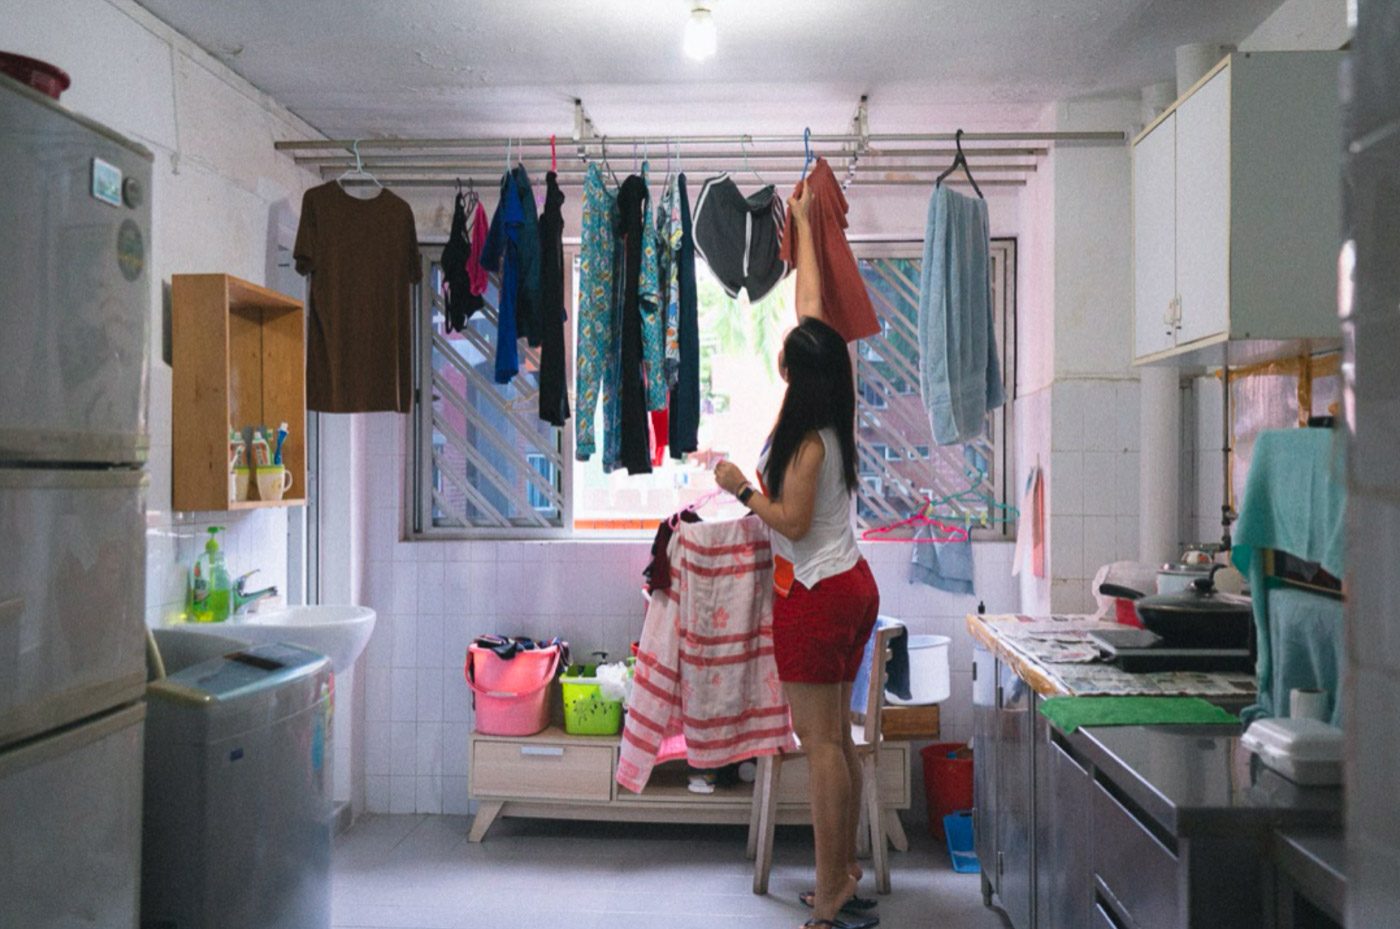 Can Singapore’s home cleaning scheme reduce maid abuse?